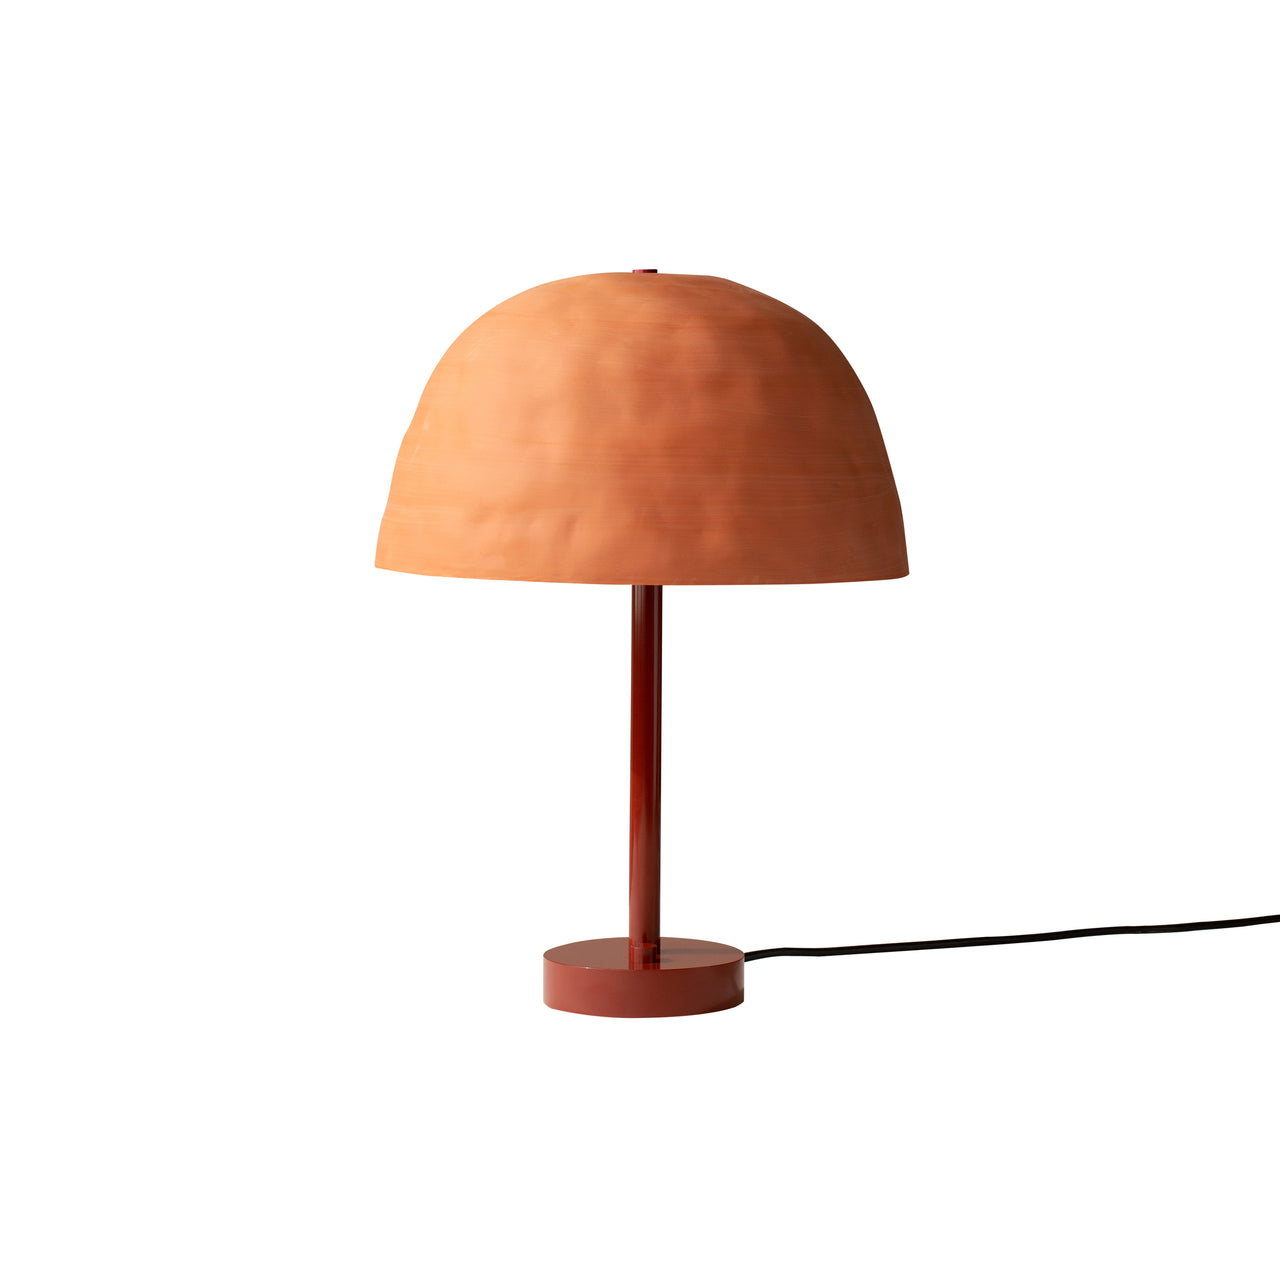 Dome Table Lamp: Terracotta + Oxide Red